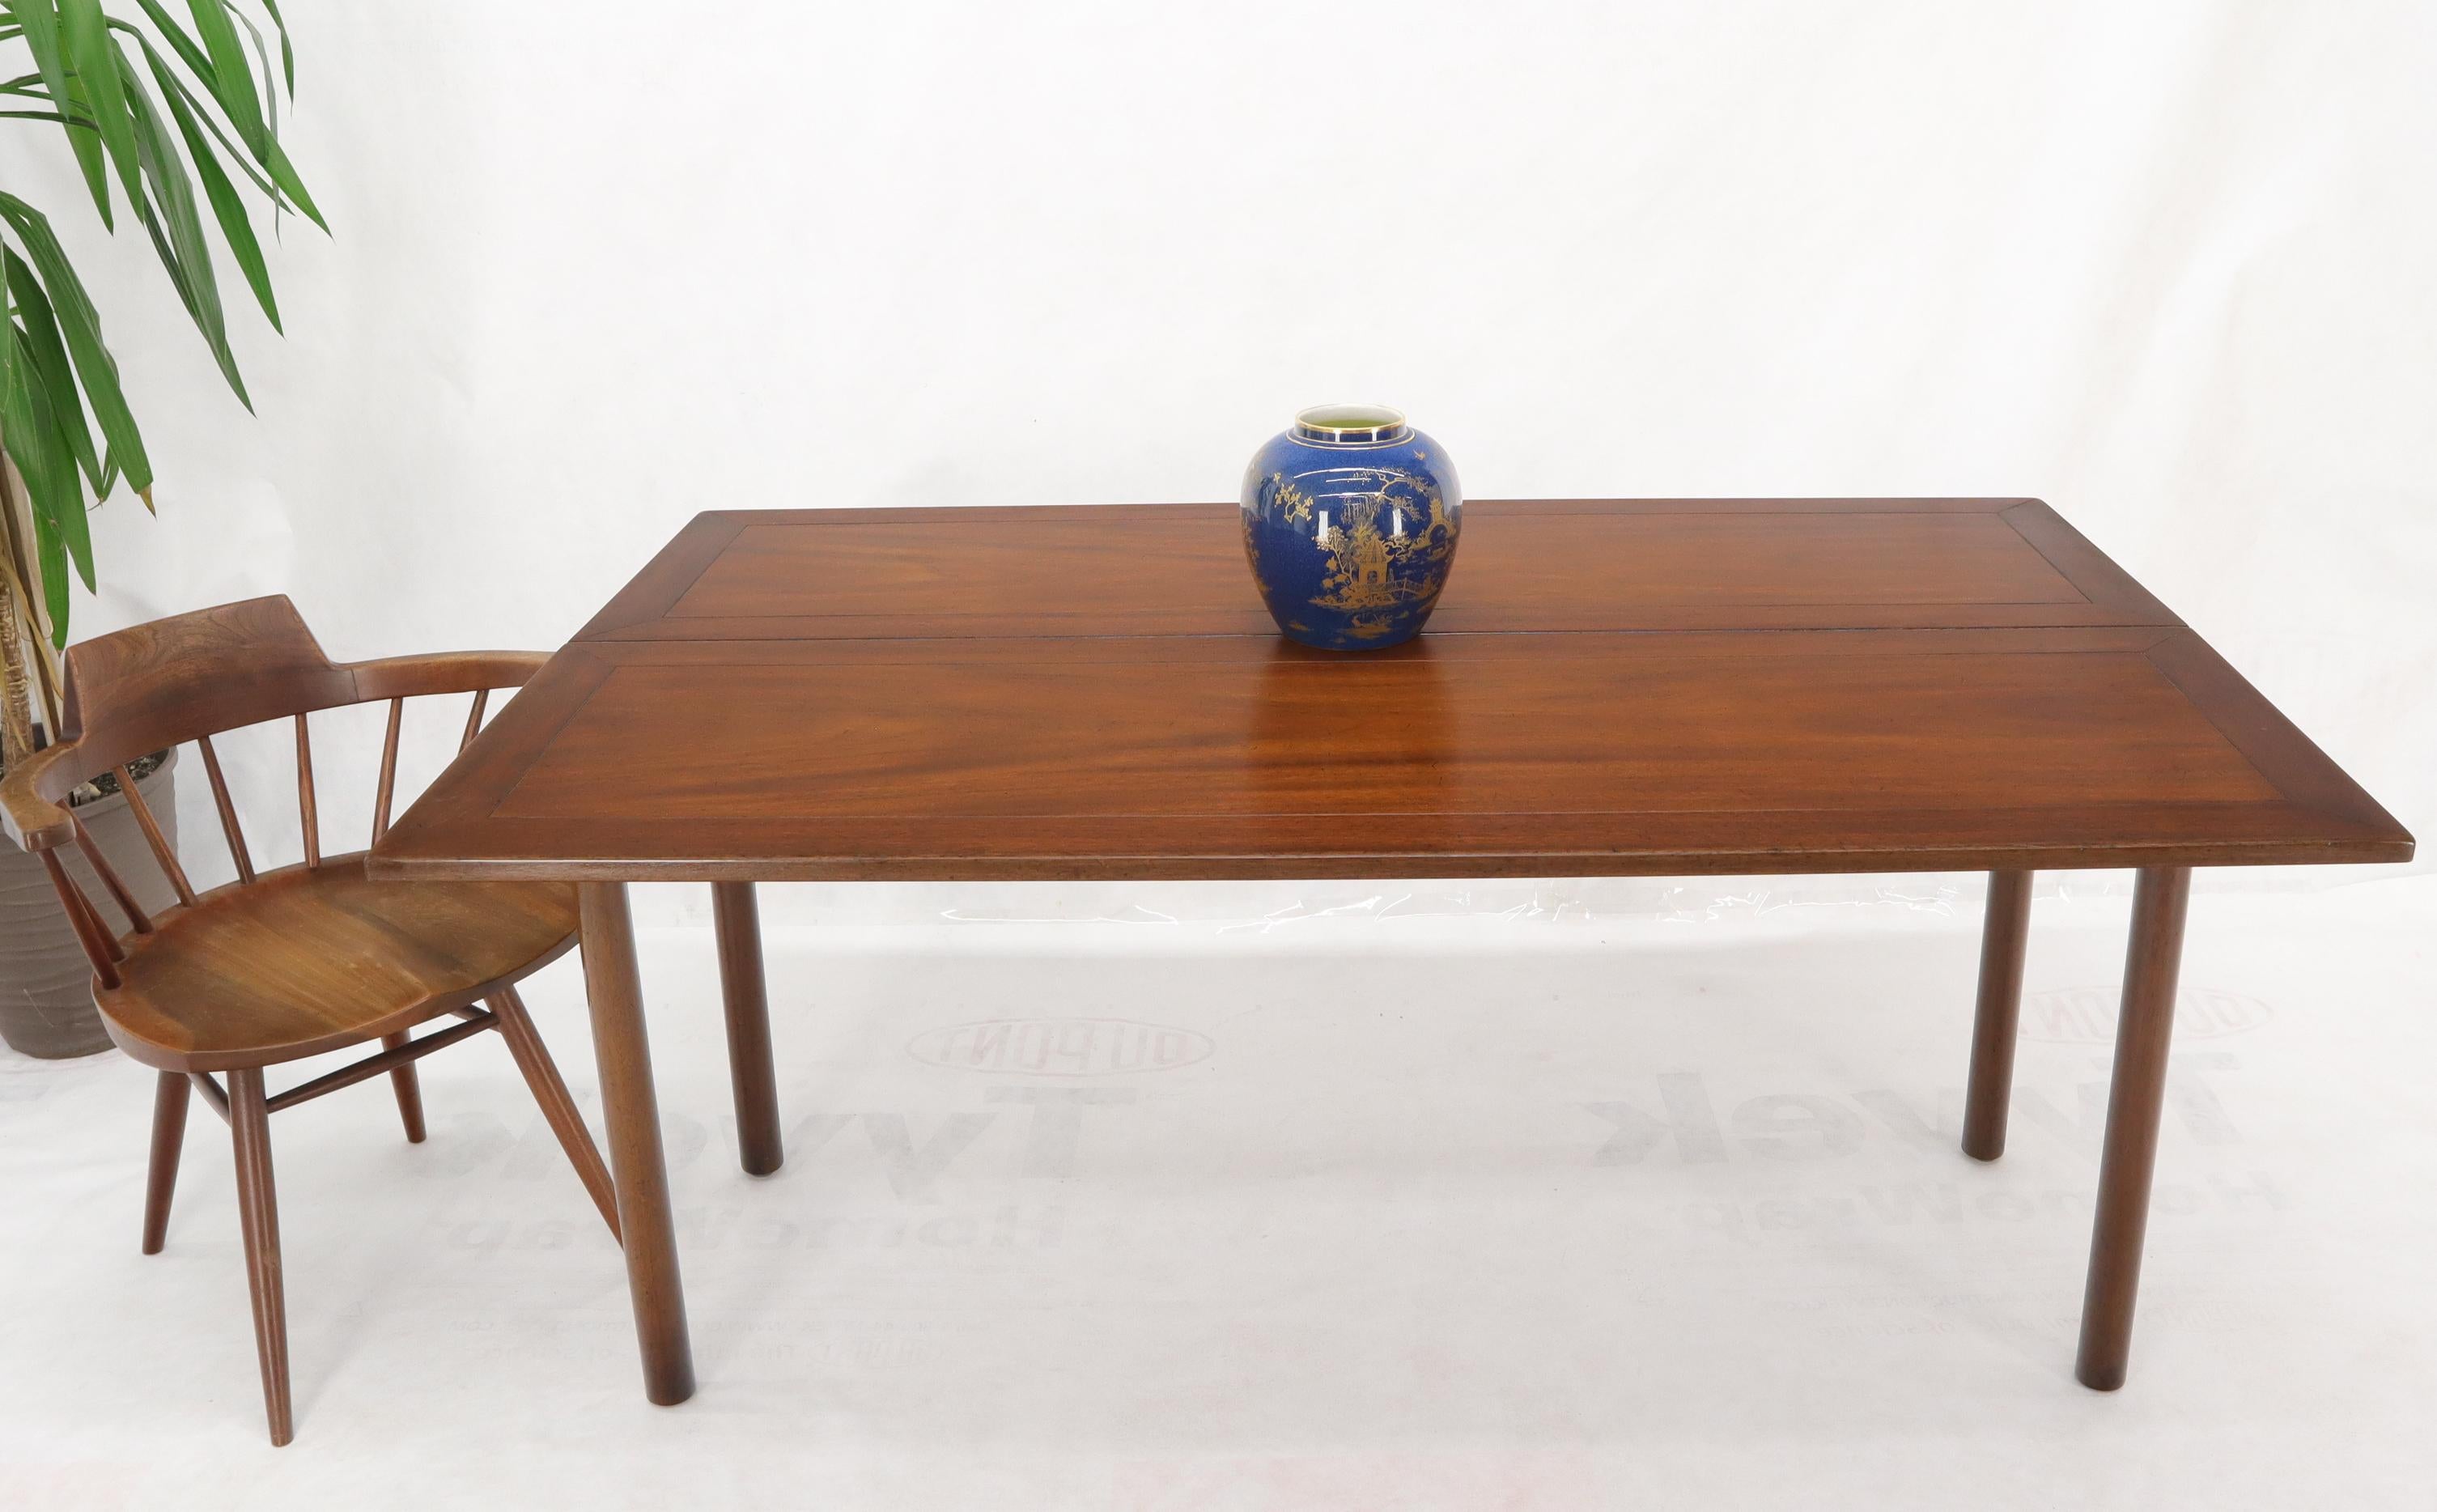 20th Century Midcentury Walnut Flip Top Console Dining Table on Cylinder Legs